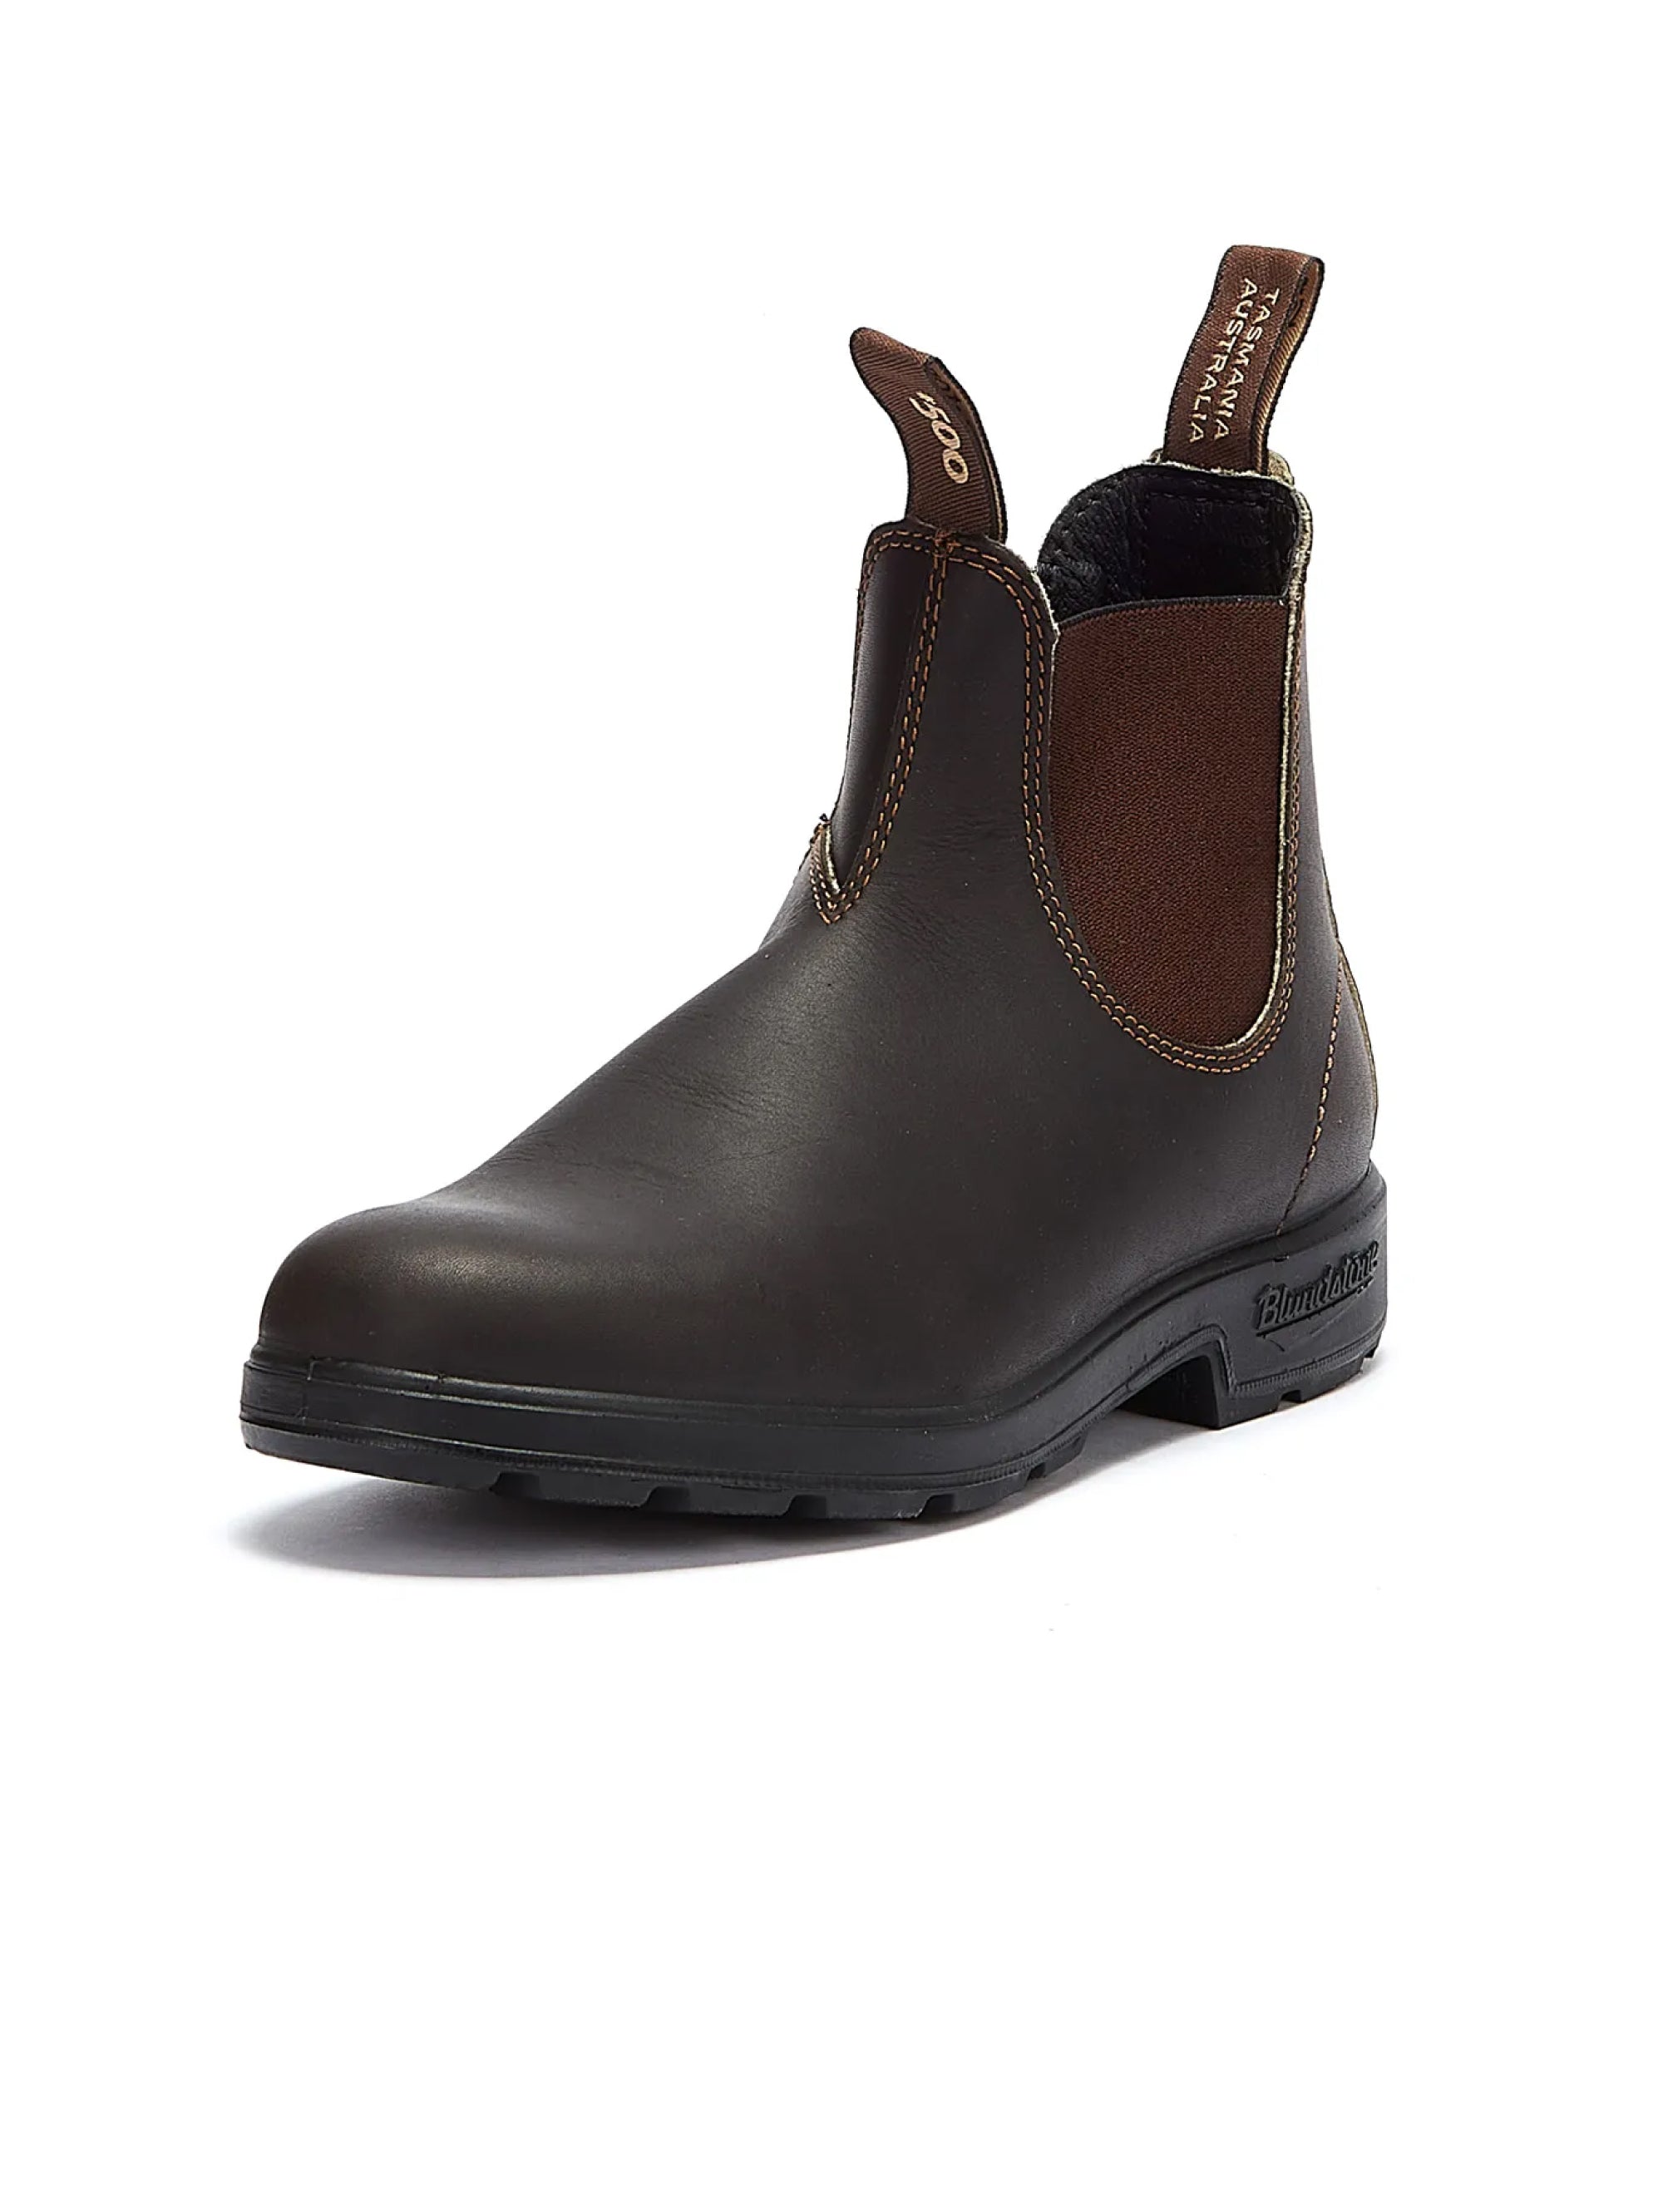 Dark Brown Leather Chelsea Boots with Elastics